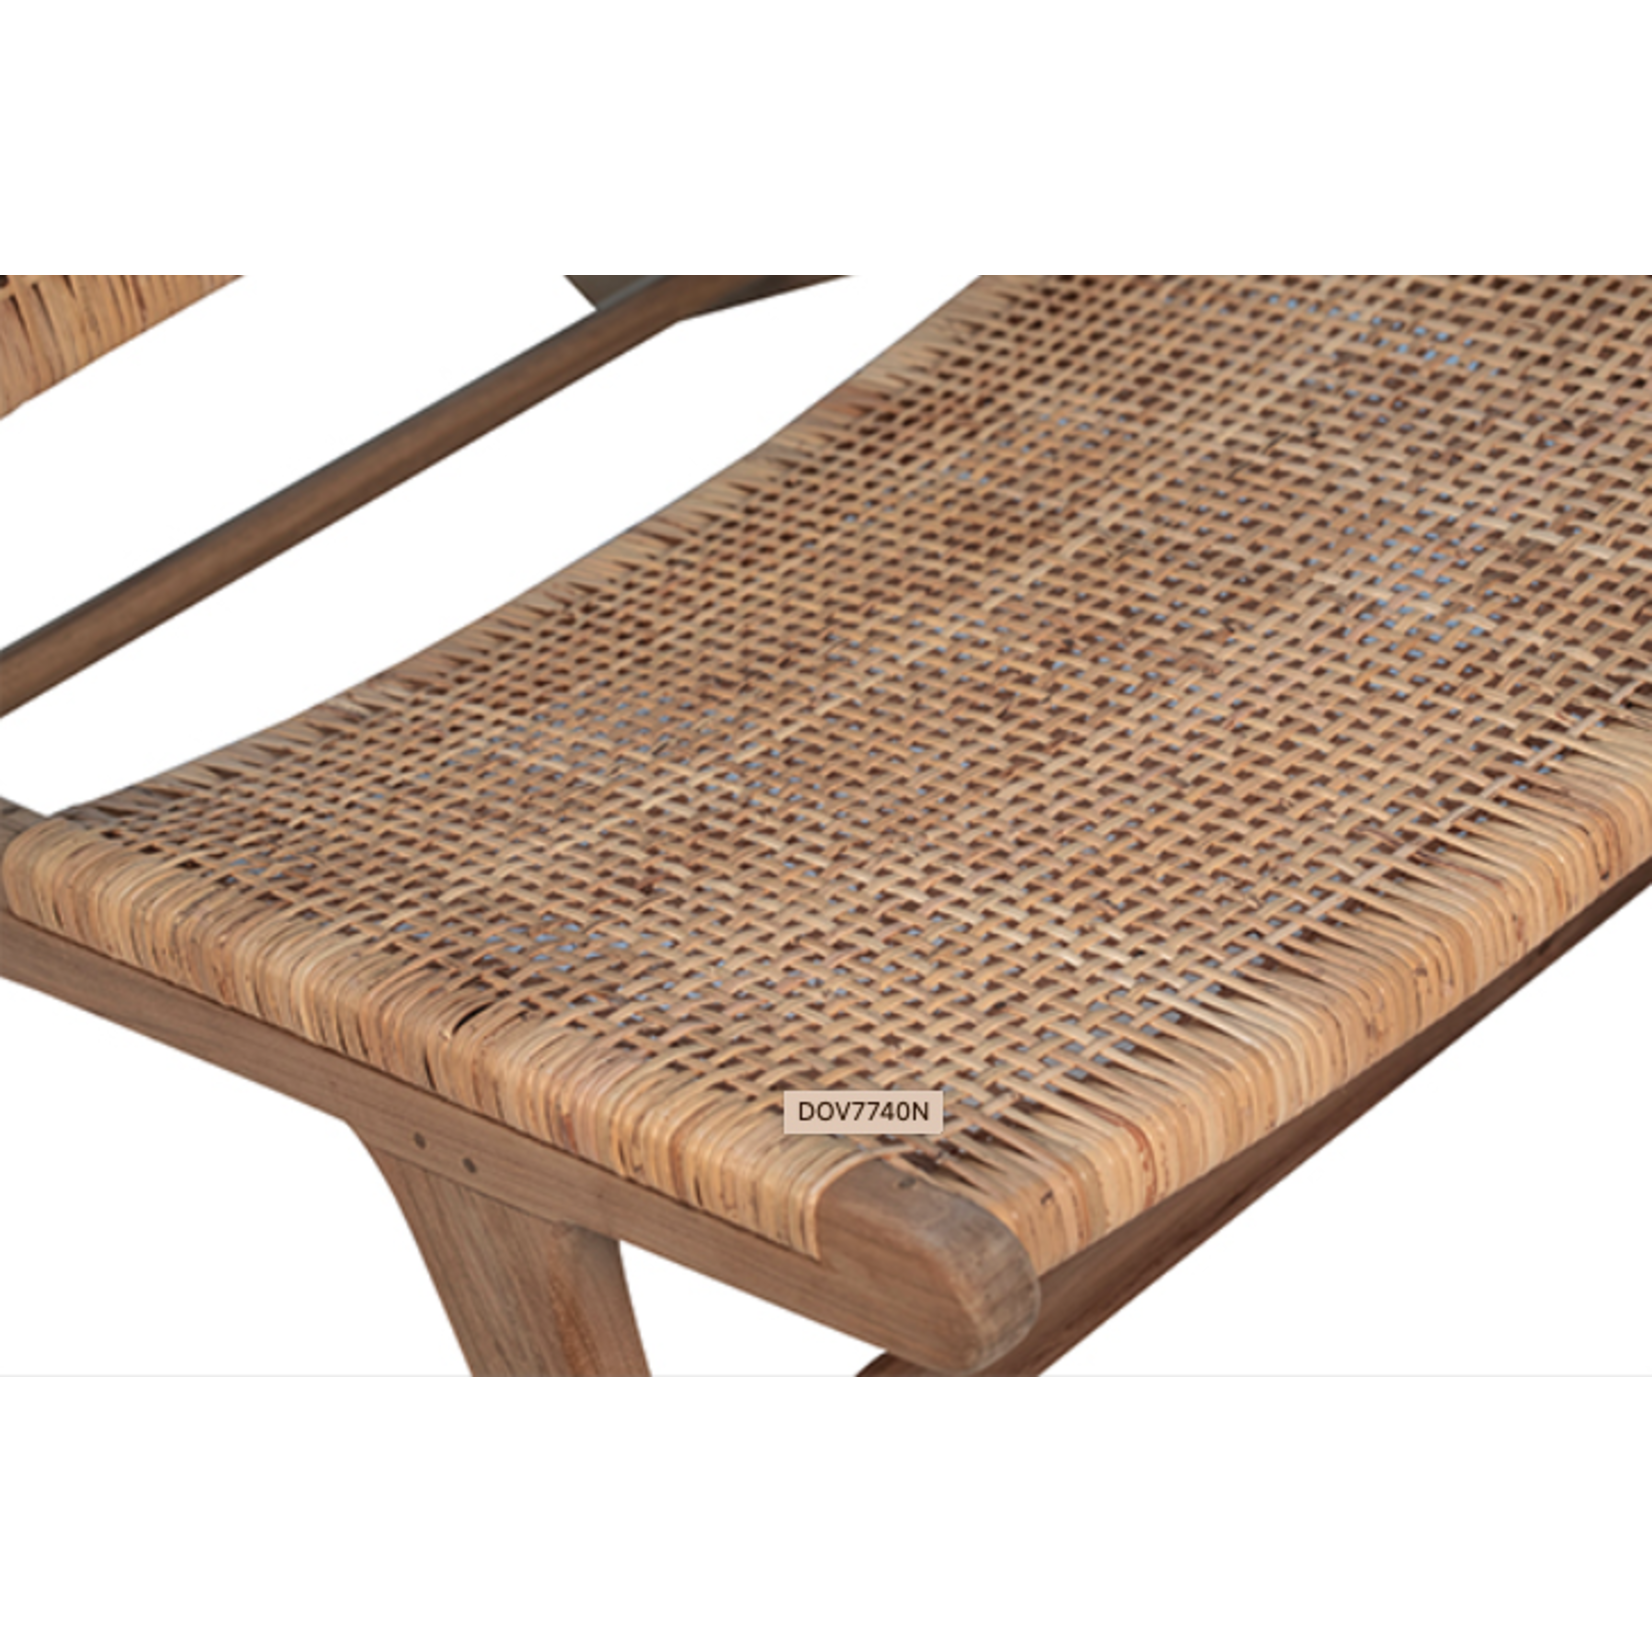 Outside The Box Emo Teak Wood & Rattan Occasional Chair